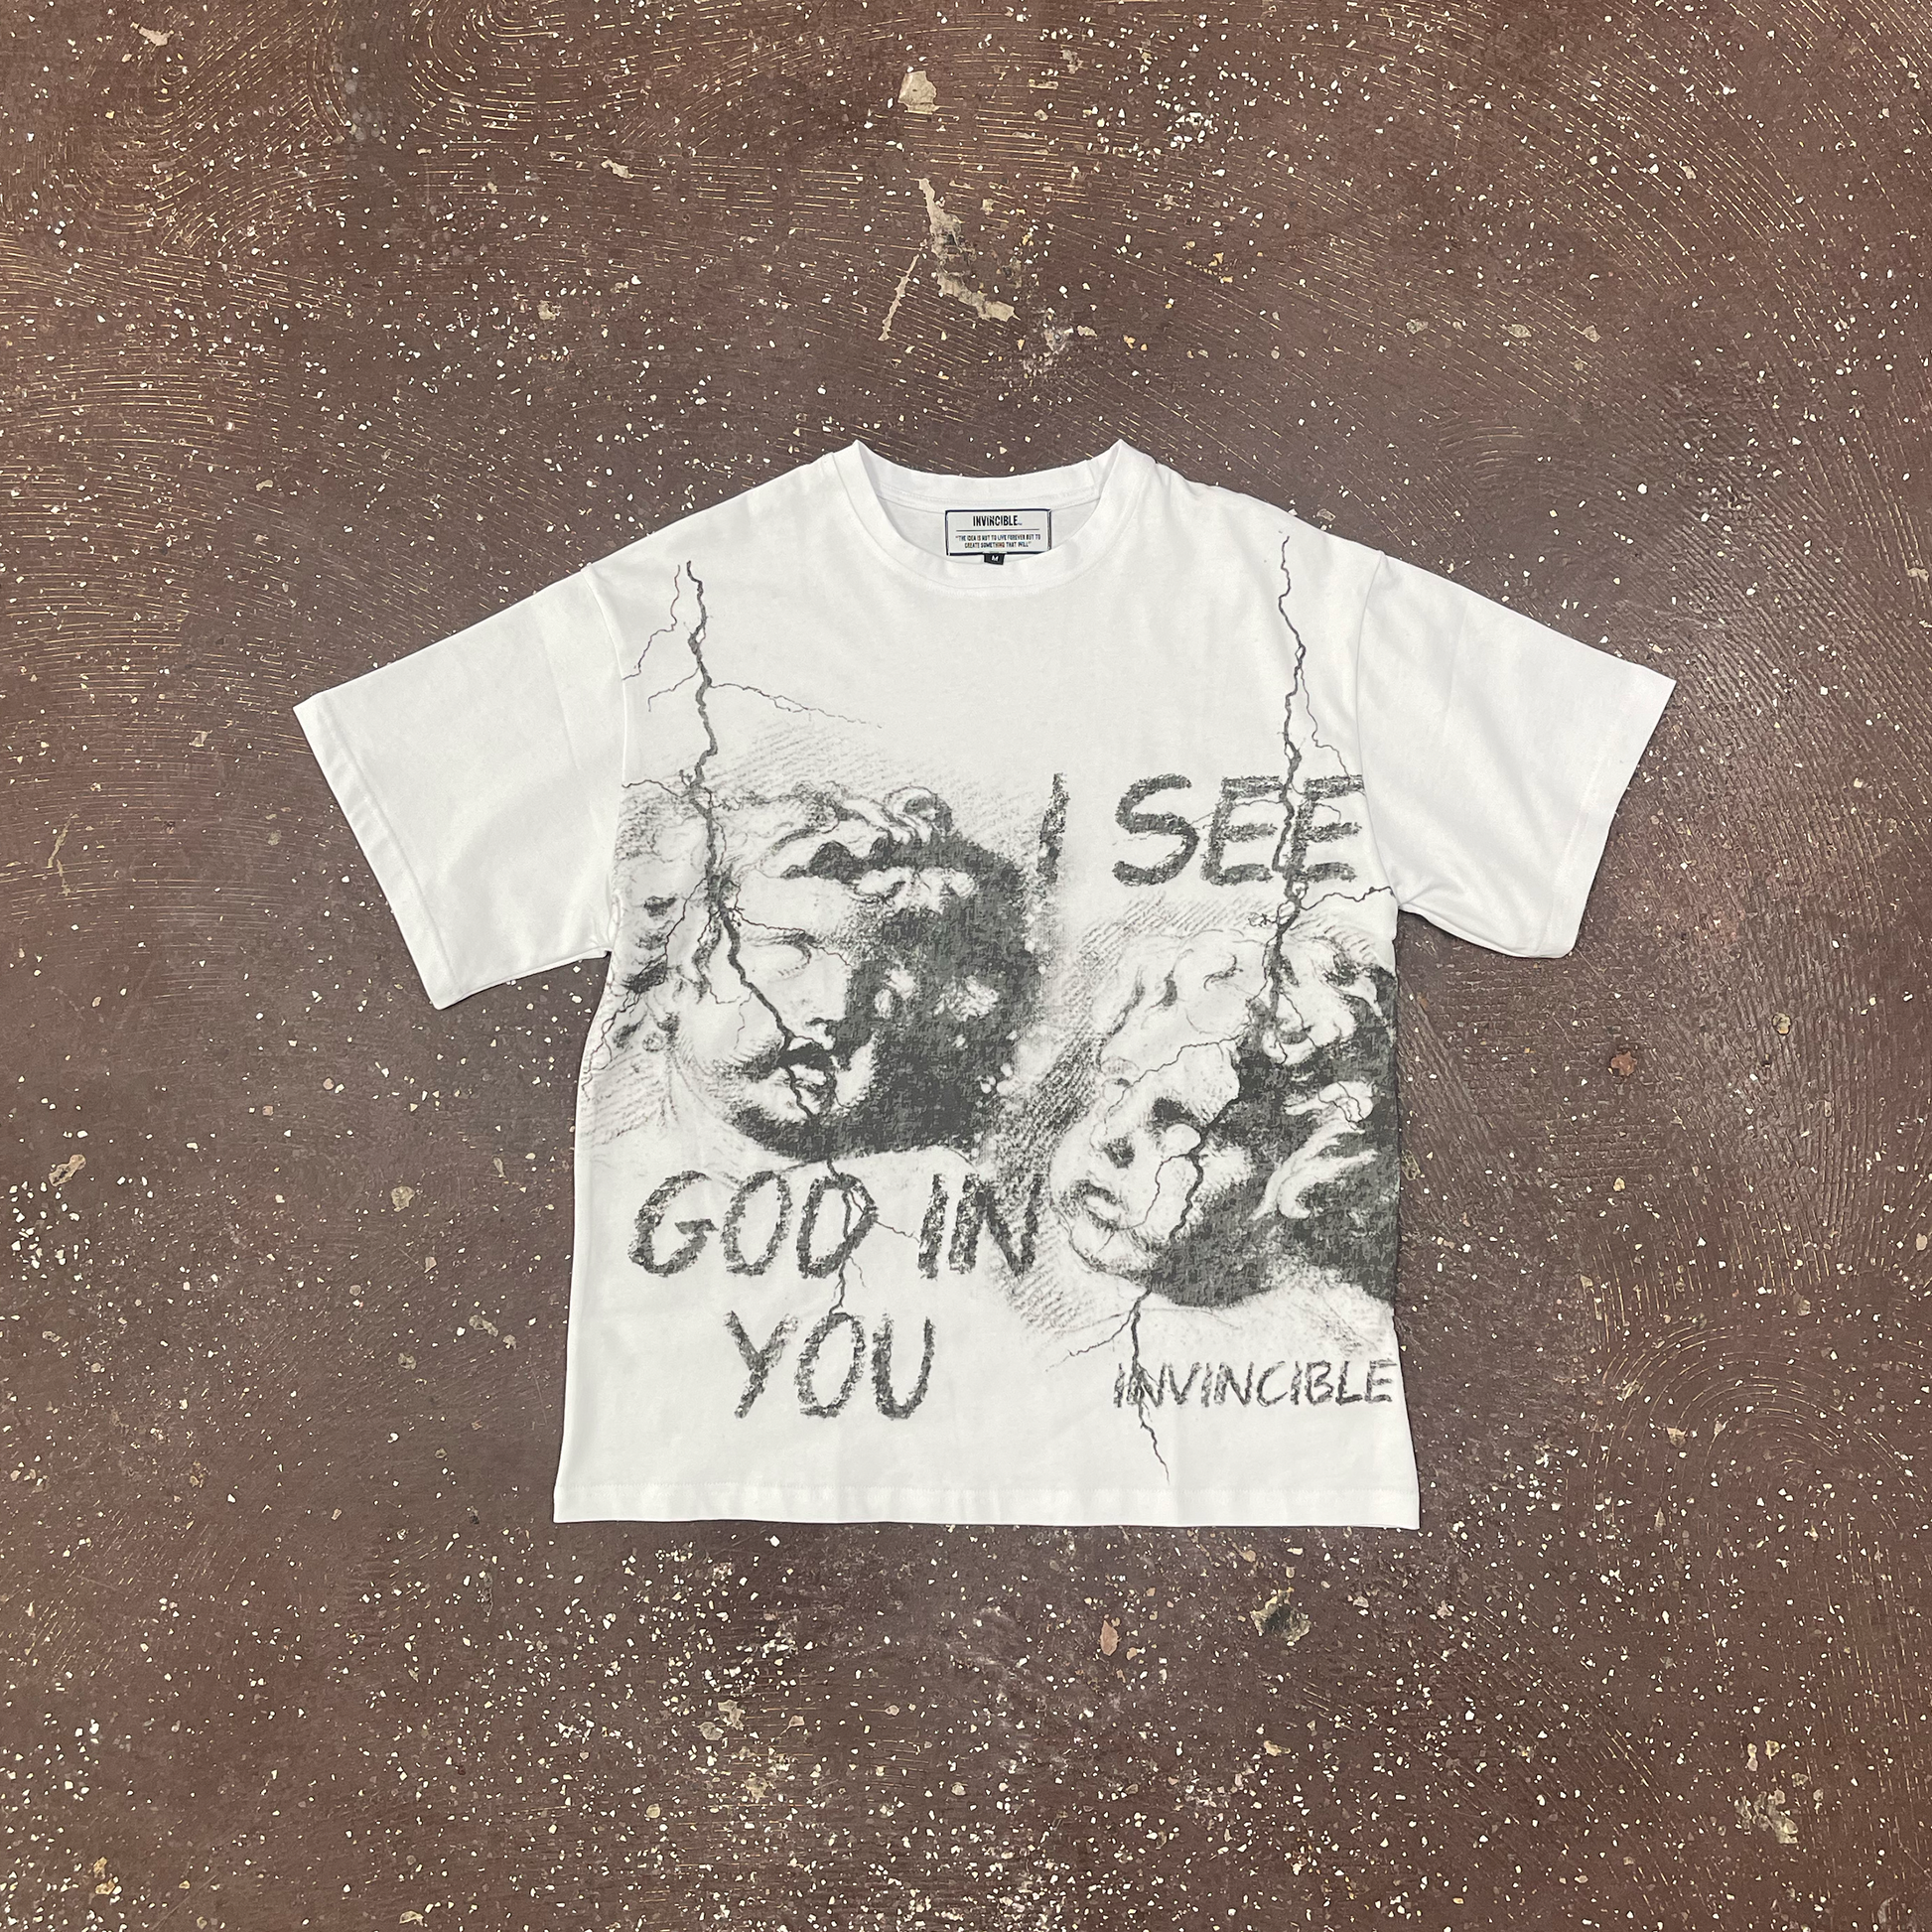 I See God In You Tee - Invincible Exclusives Streetwear